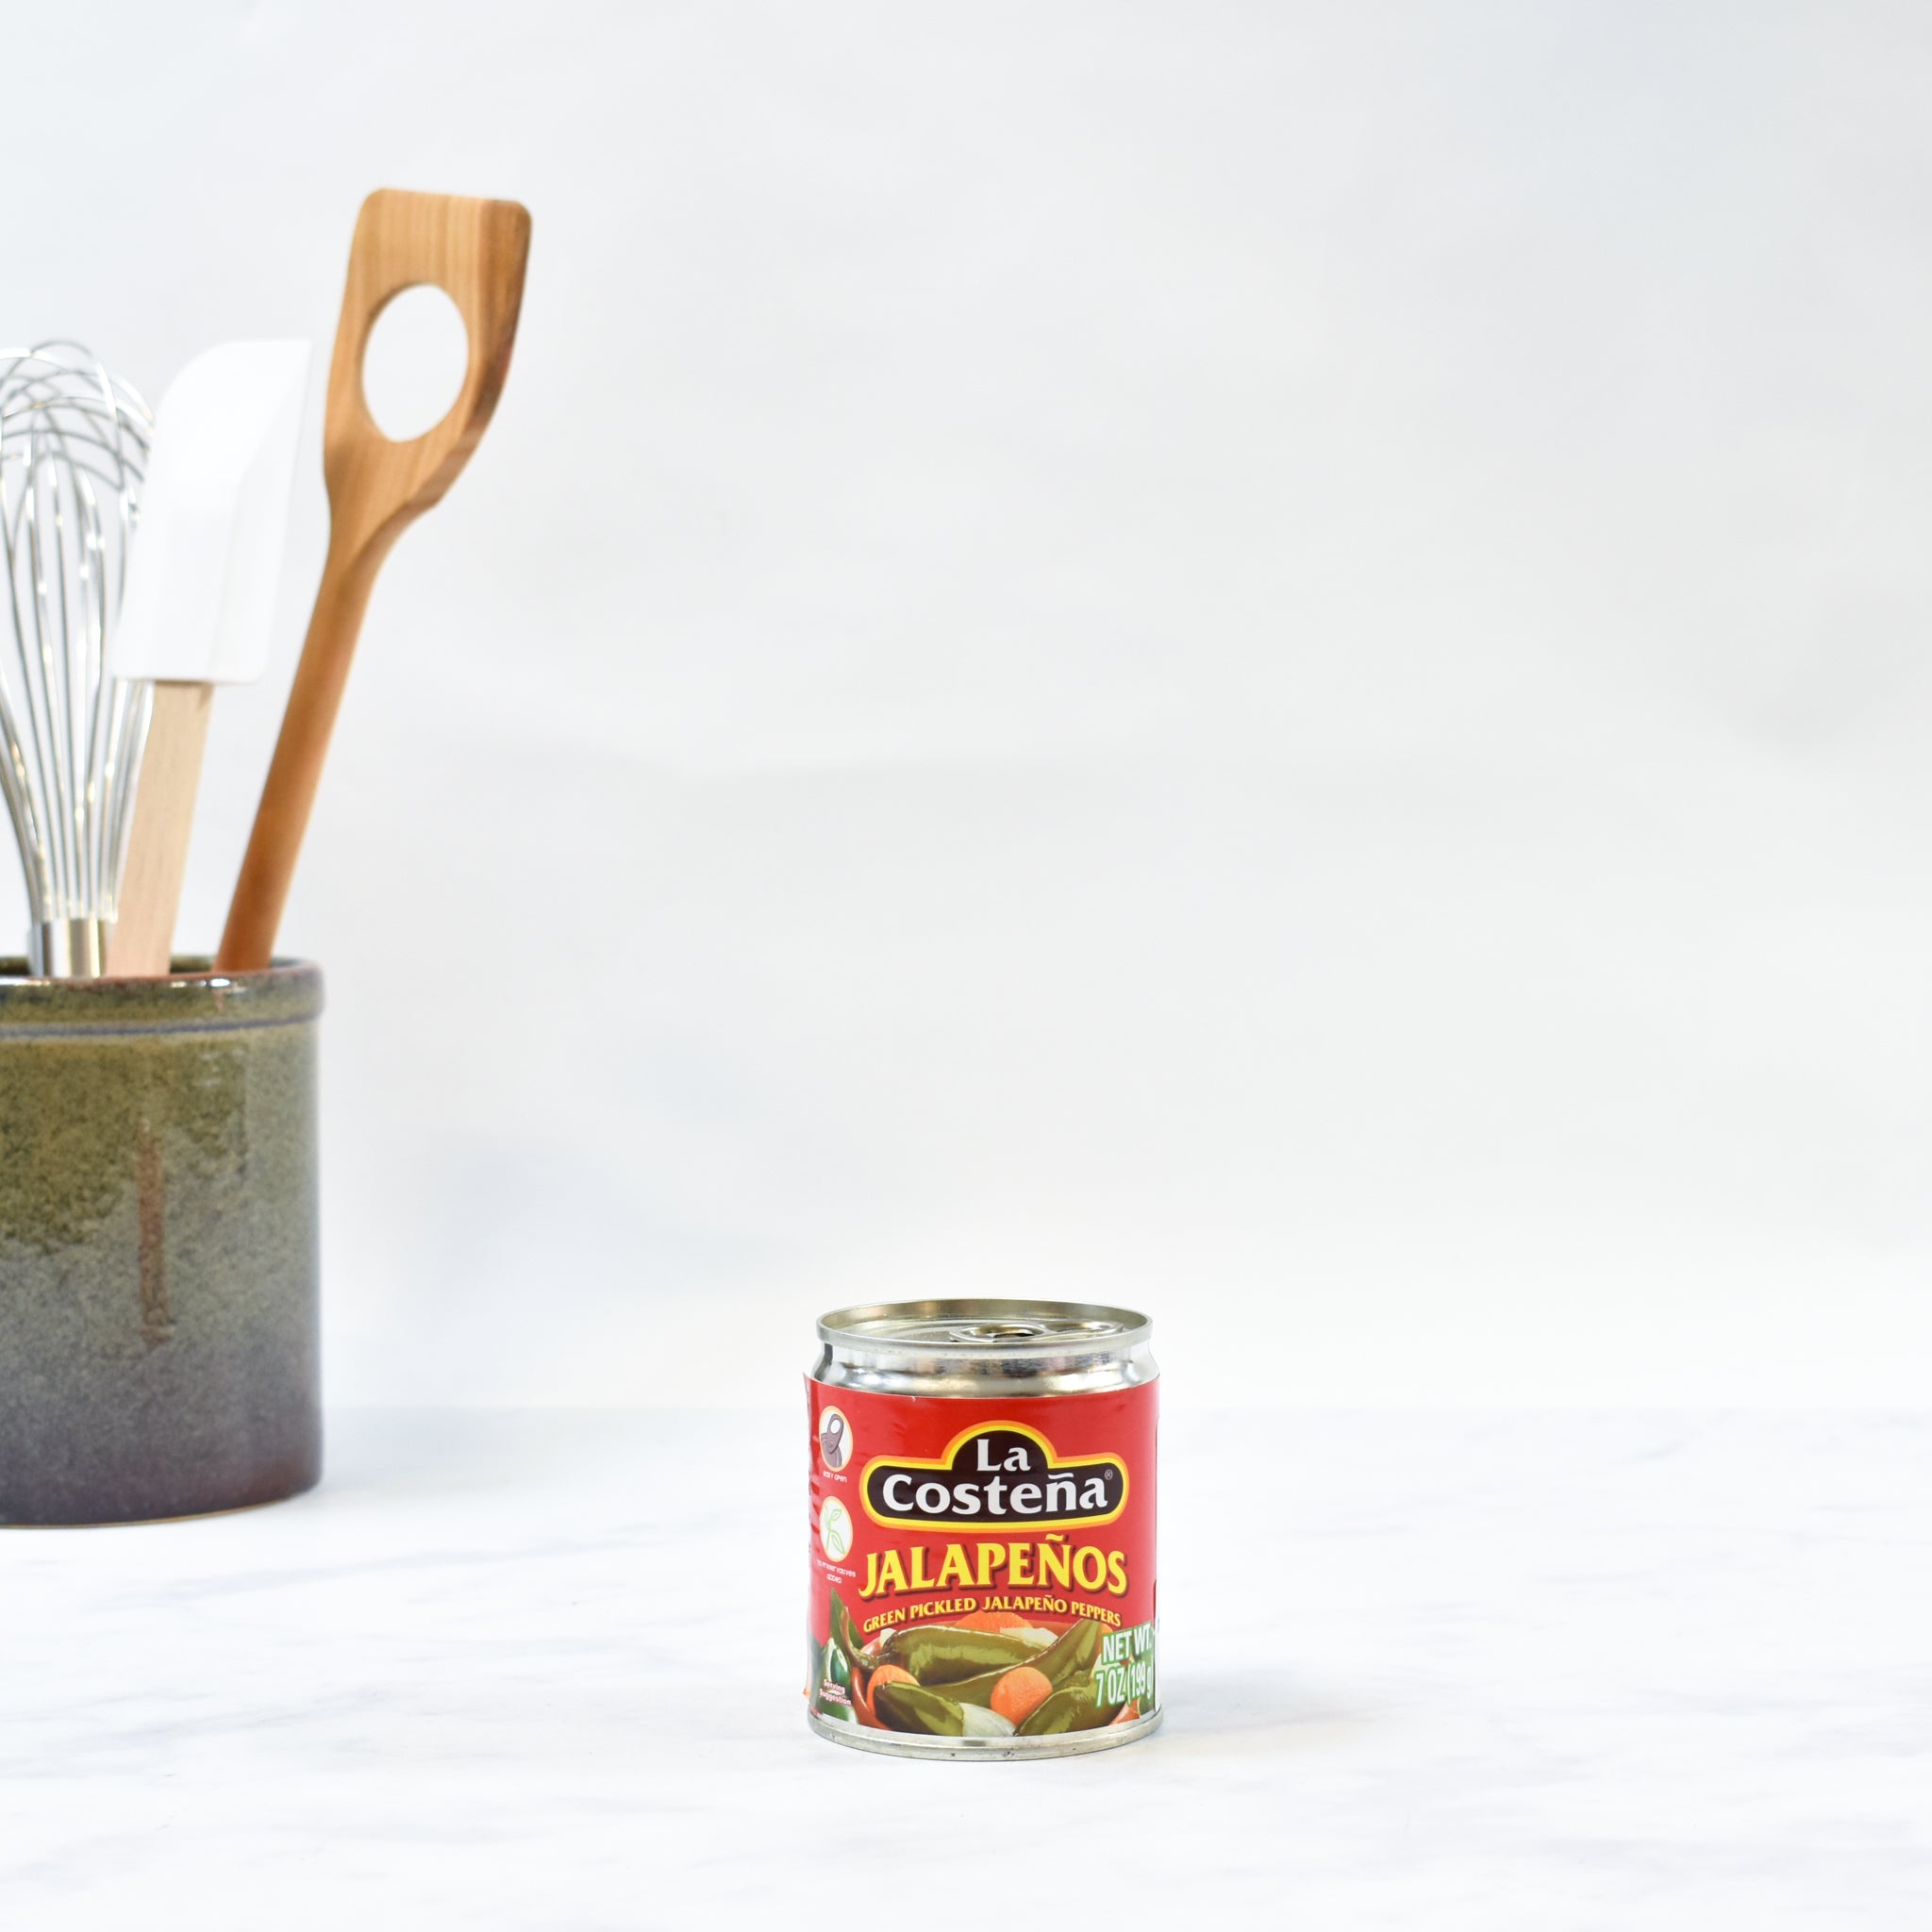 La Costena Whole Green Jalapeno Peppers 199g Ingredients Pickled & Preserved Vegetables Mexican Food